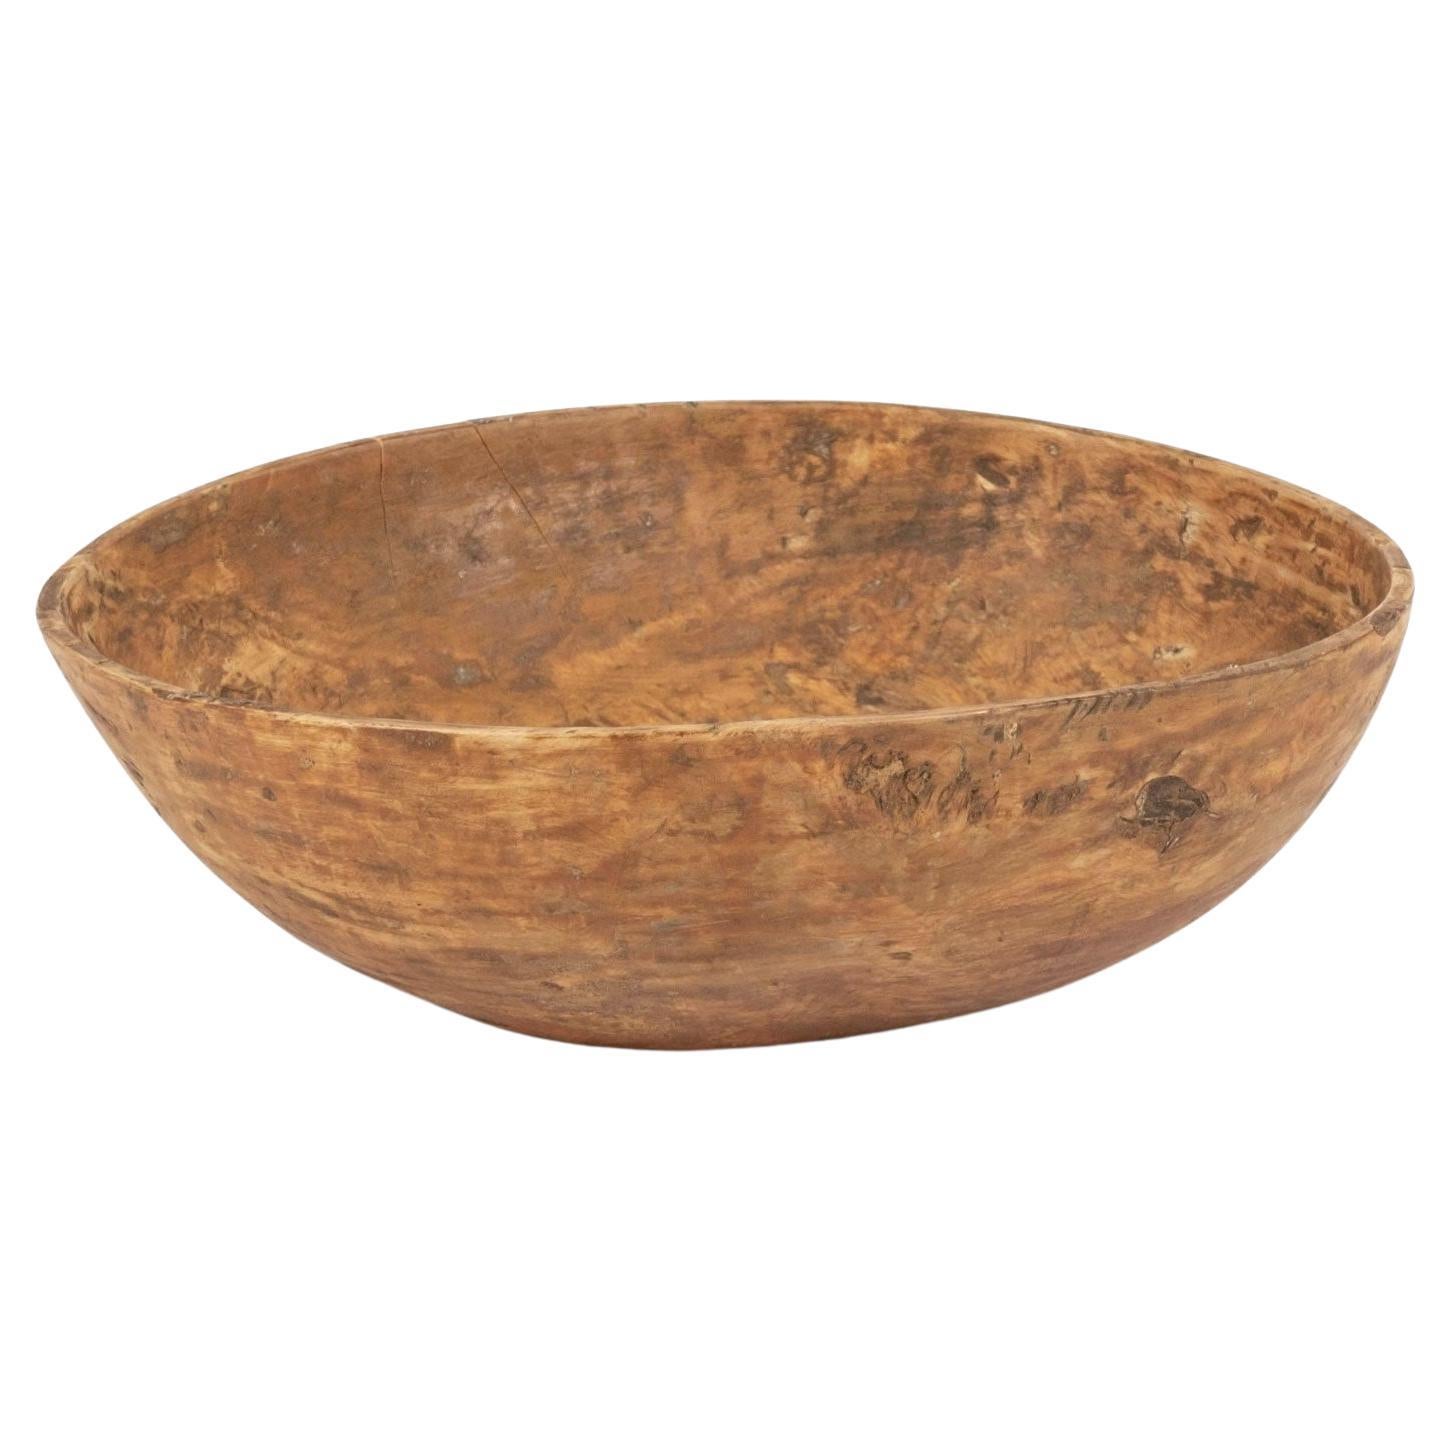 Ocher Color Rustic Swedish Wooden Dug Out Bowl For Sale